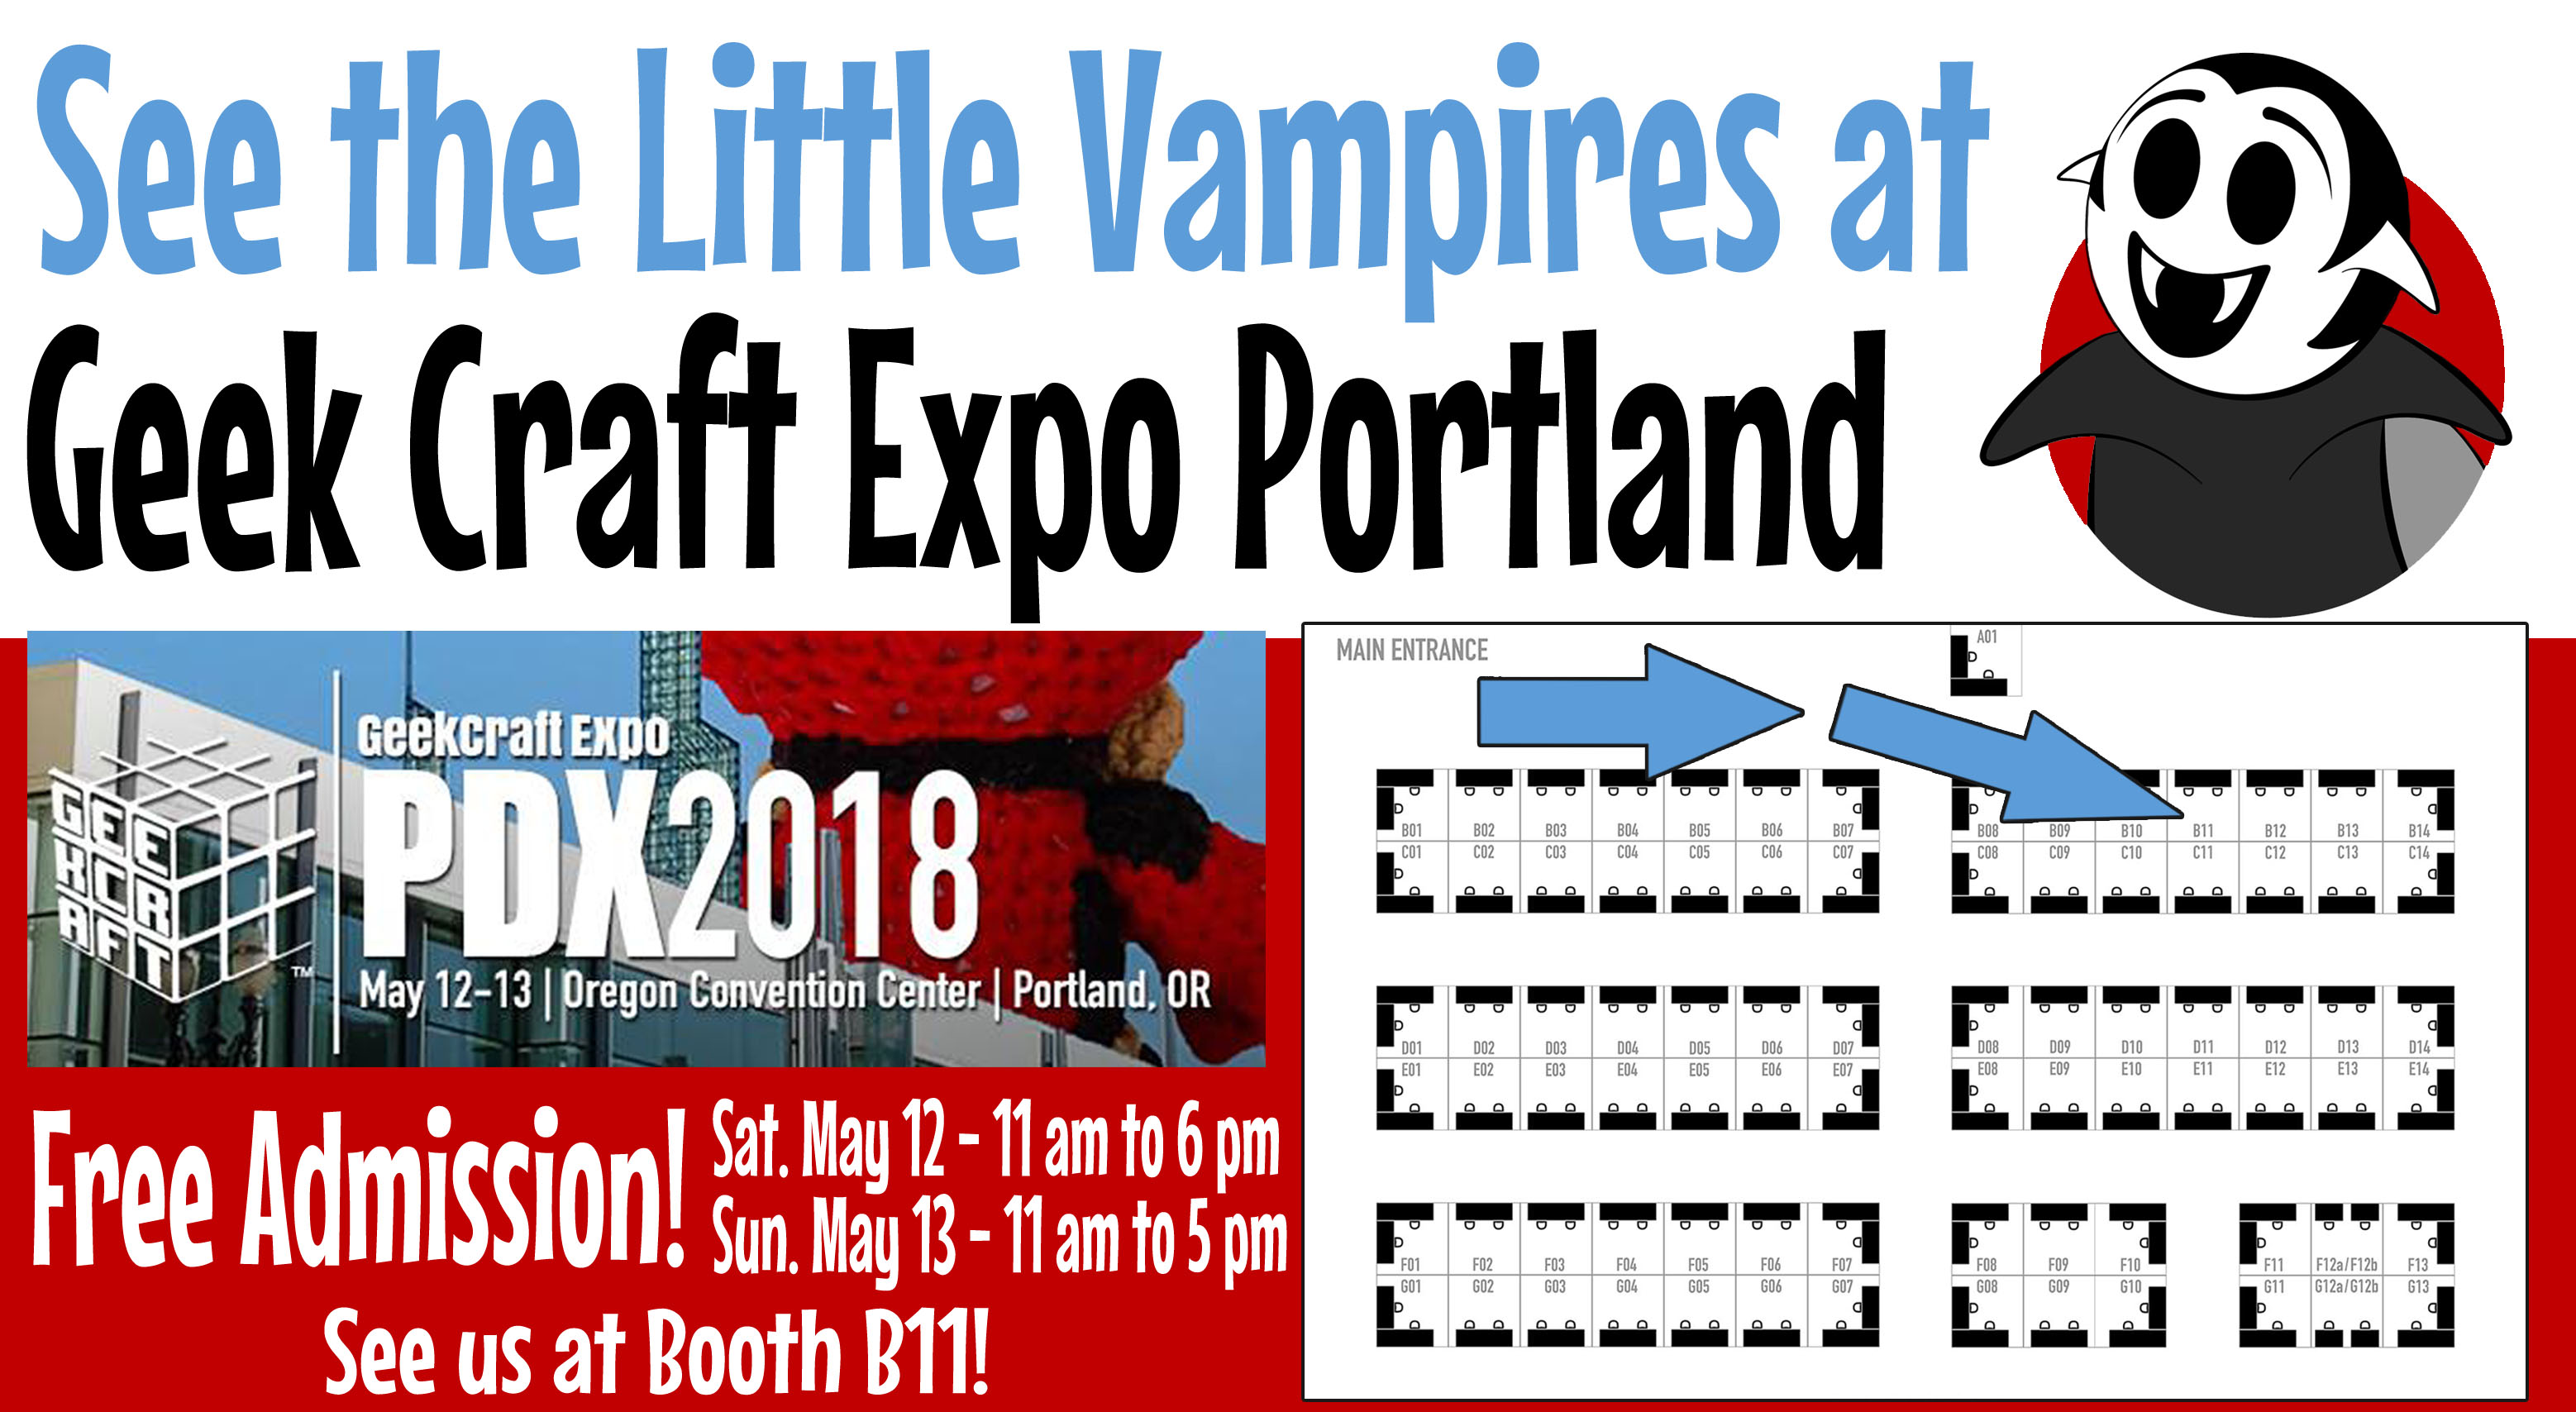 Geek Craft Expo PDX 2018 exhibitor floor map with the Little Vampires booth highlighted